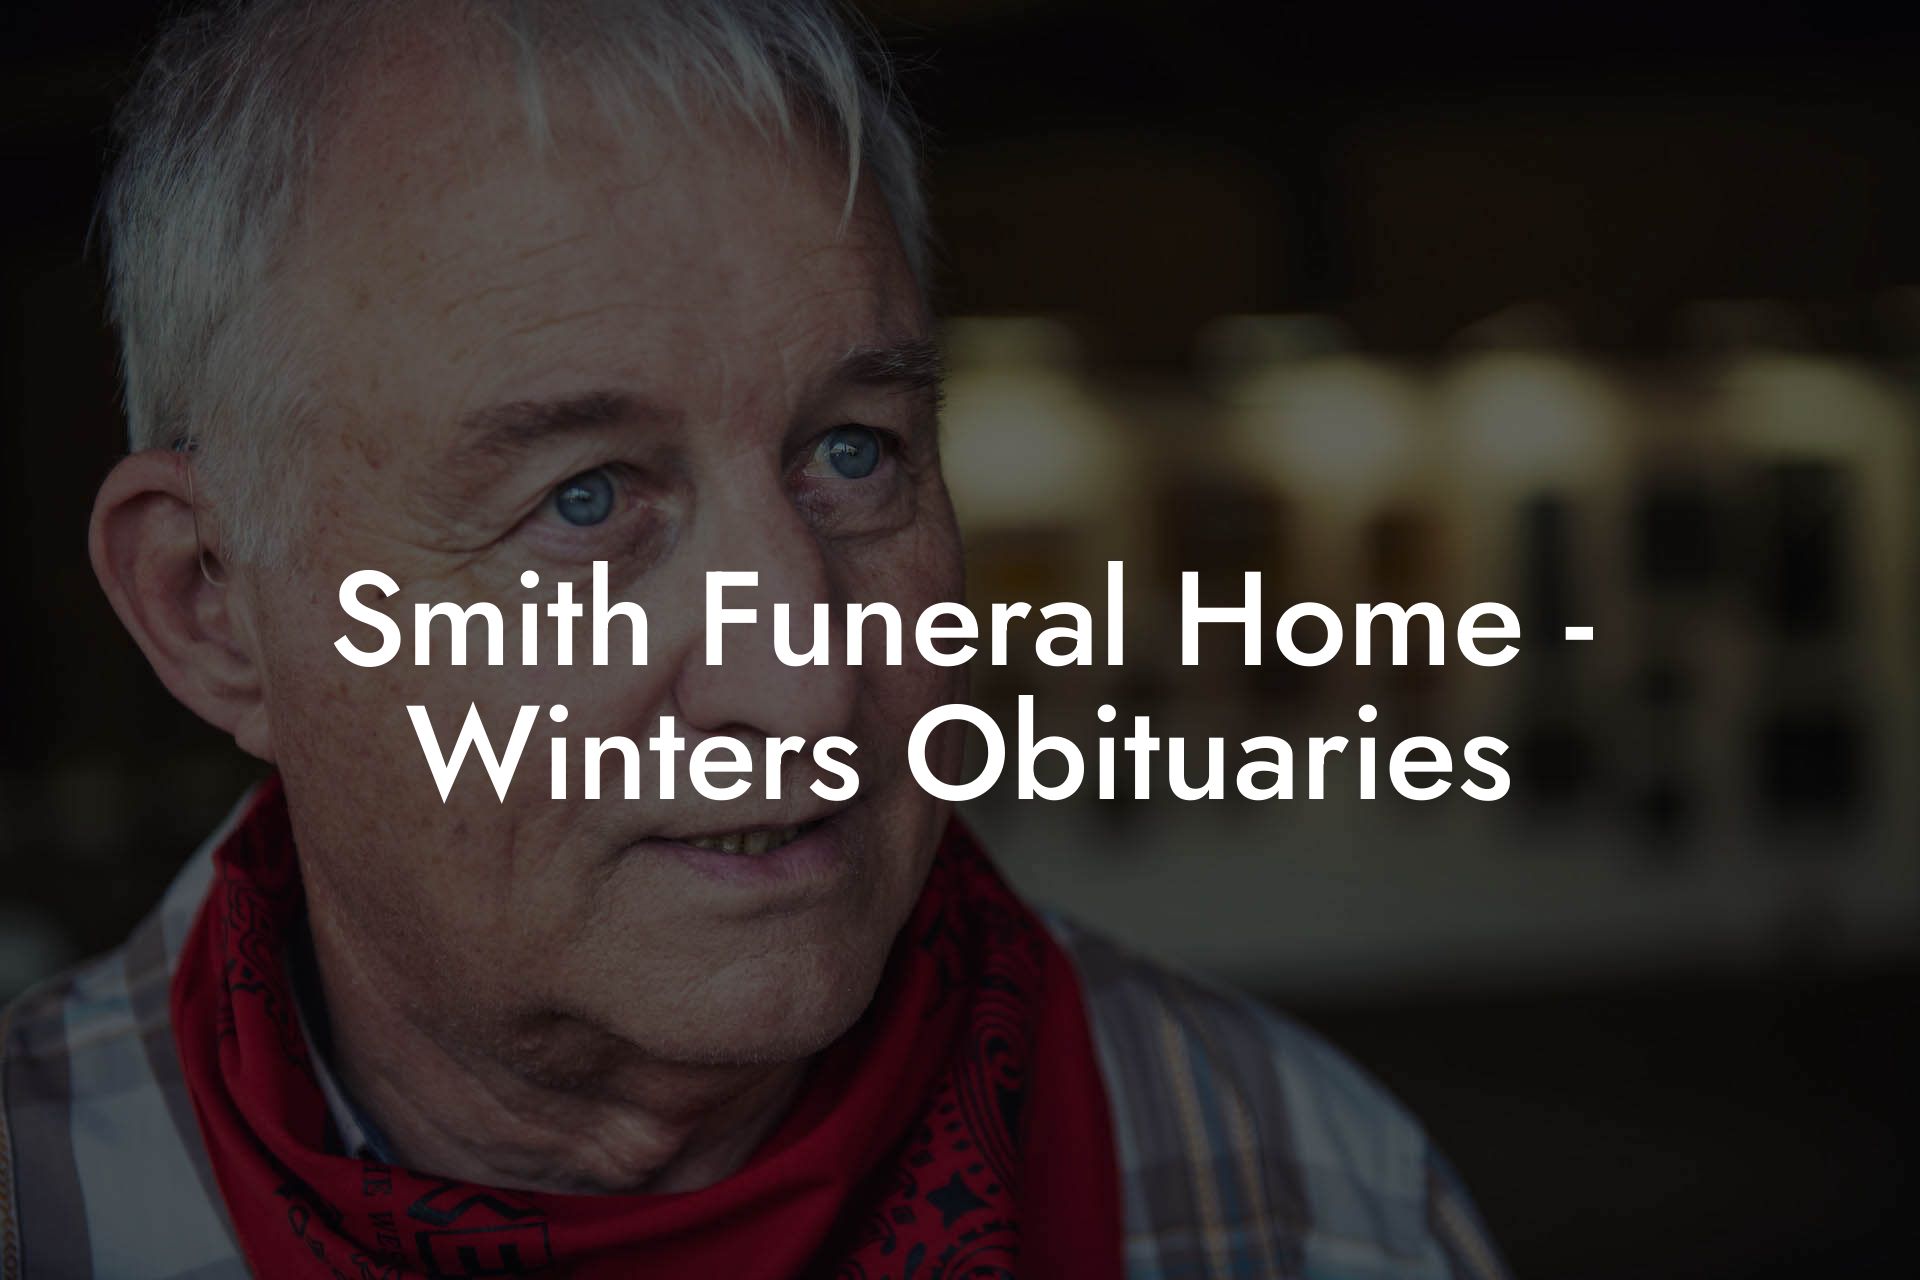 Smith Funeral Home - Winters Obituaries